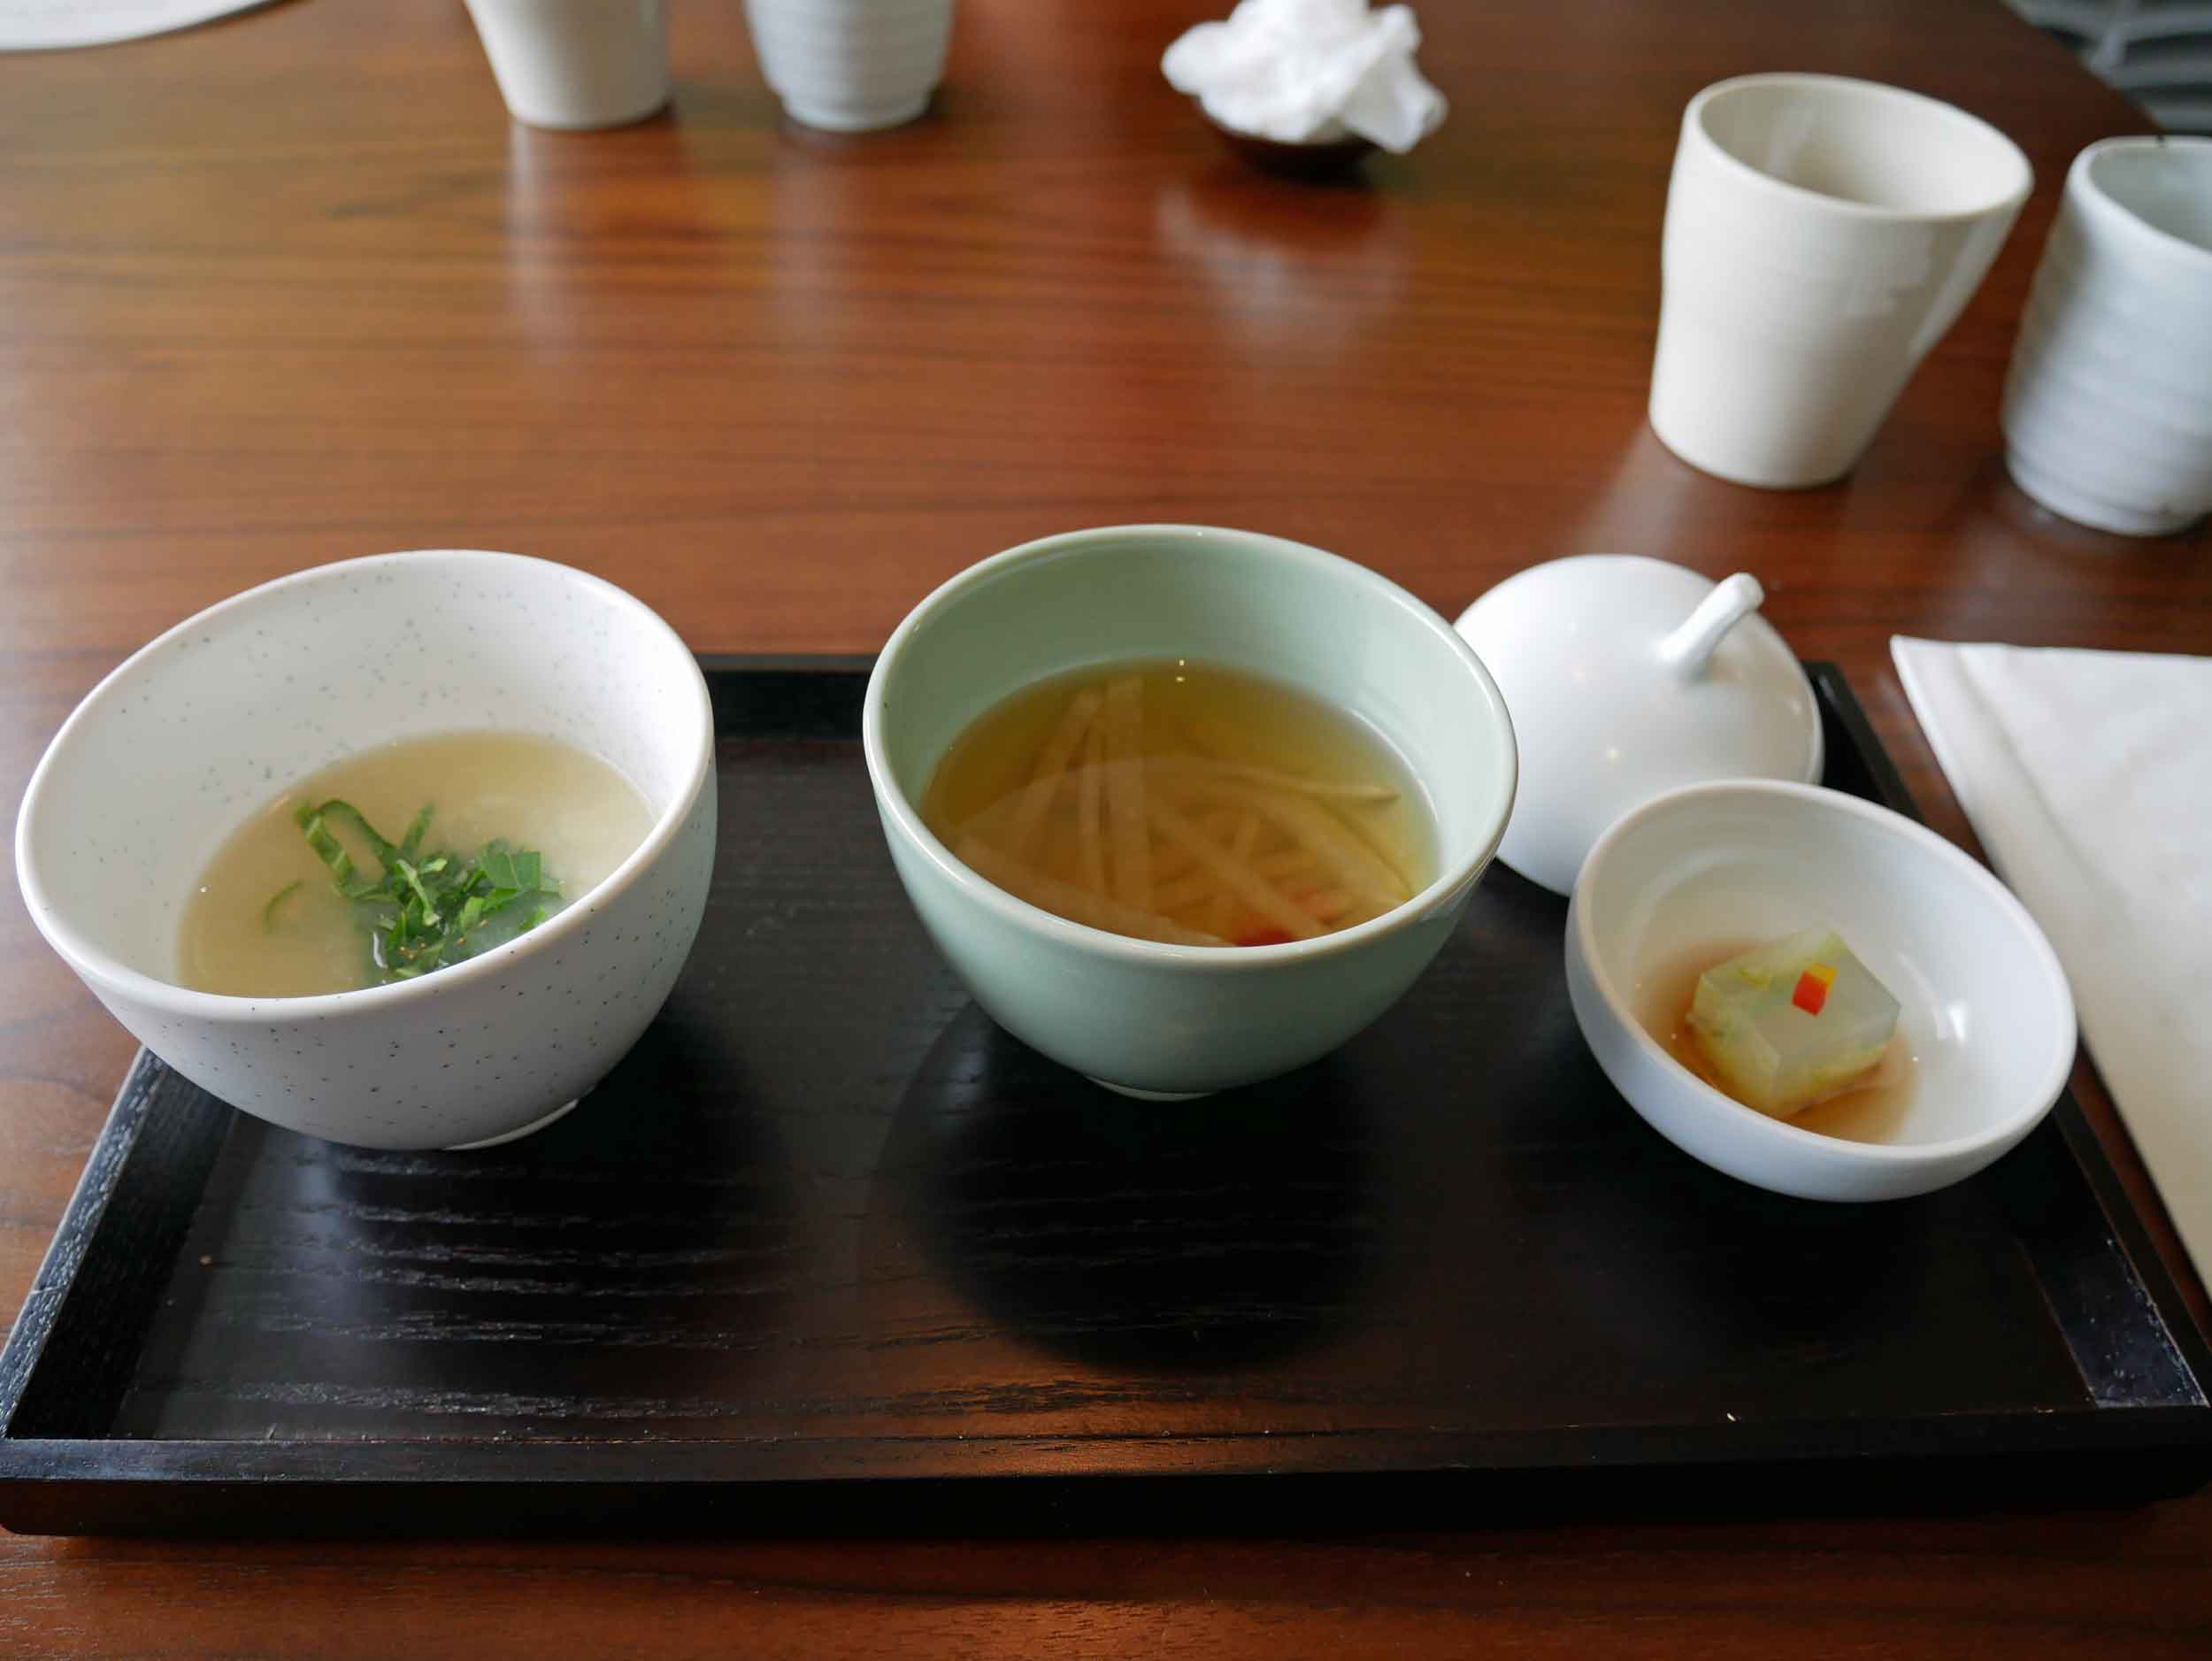  We opted for the tasting menu - so hang on to your robes! First up, the  suljuksim , or amuse-bouche, of cucumber jelly with seven years aged kelp &amp; persimmon vinegar, and  juksang , or porridge, of potato soup with salted white radish. 